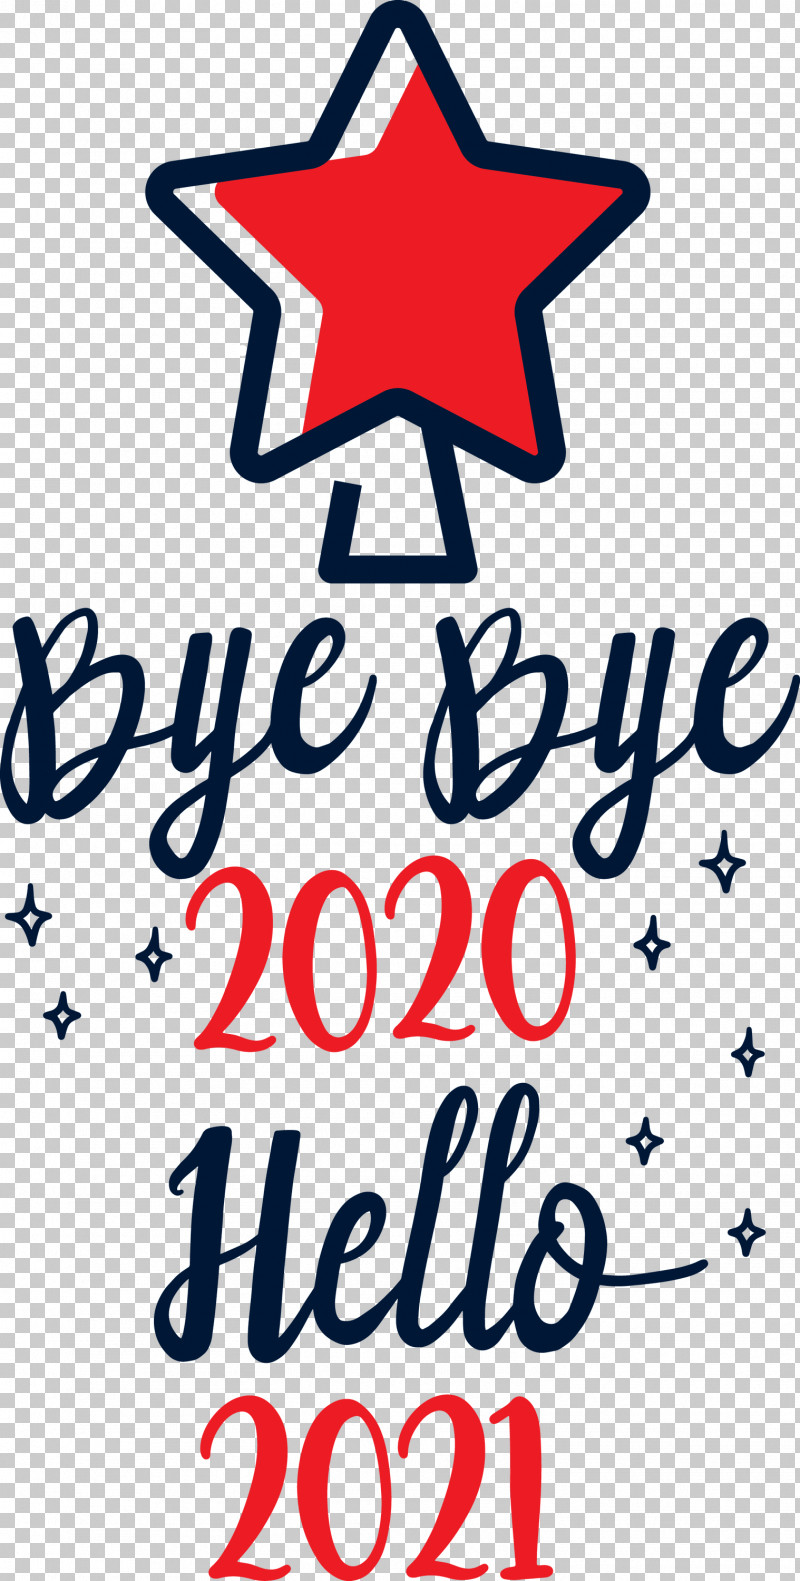 Hello 2021 Year Bye Bye 2020 Year PNG, Clipart, Bye Bye 2020 Year, Geometry, Hello 2021 Year, Line, Logo Free PNG Download